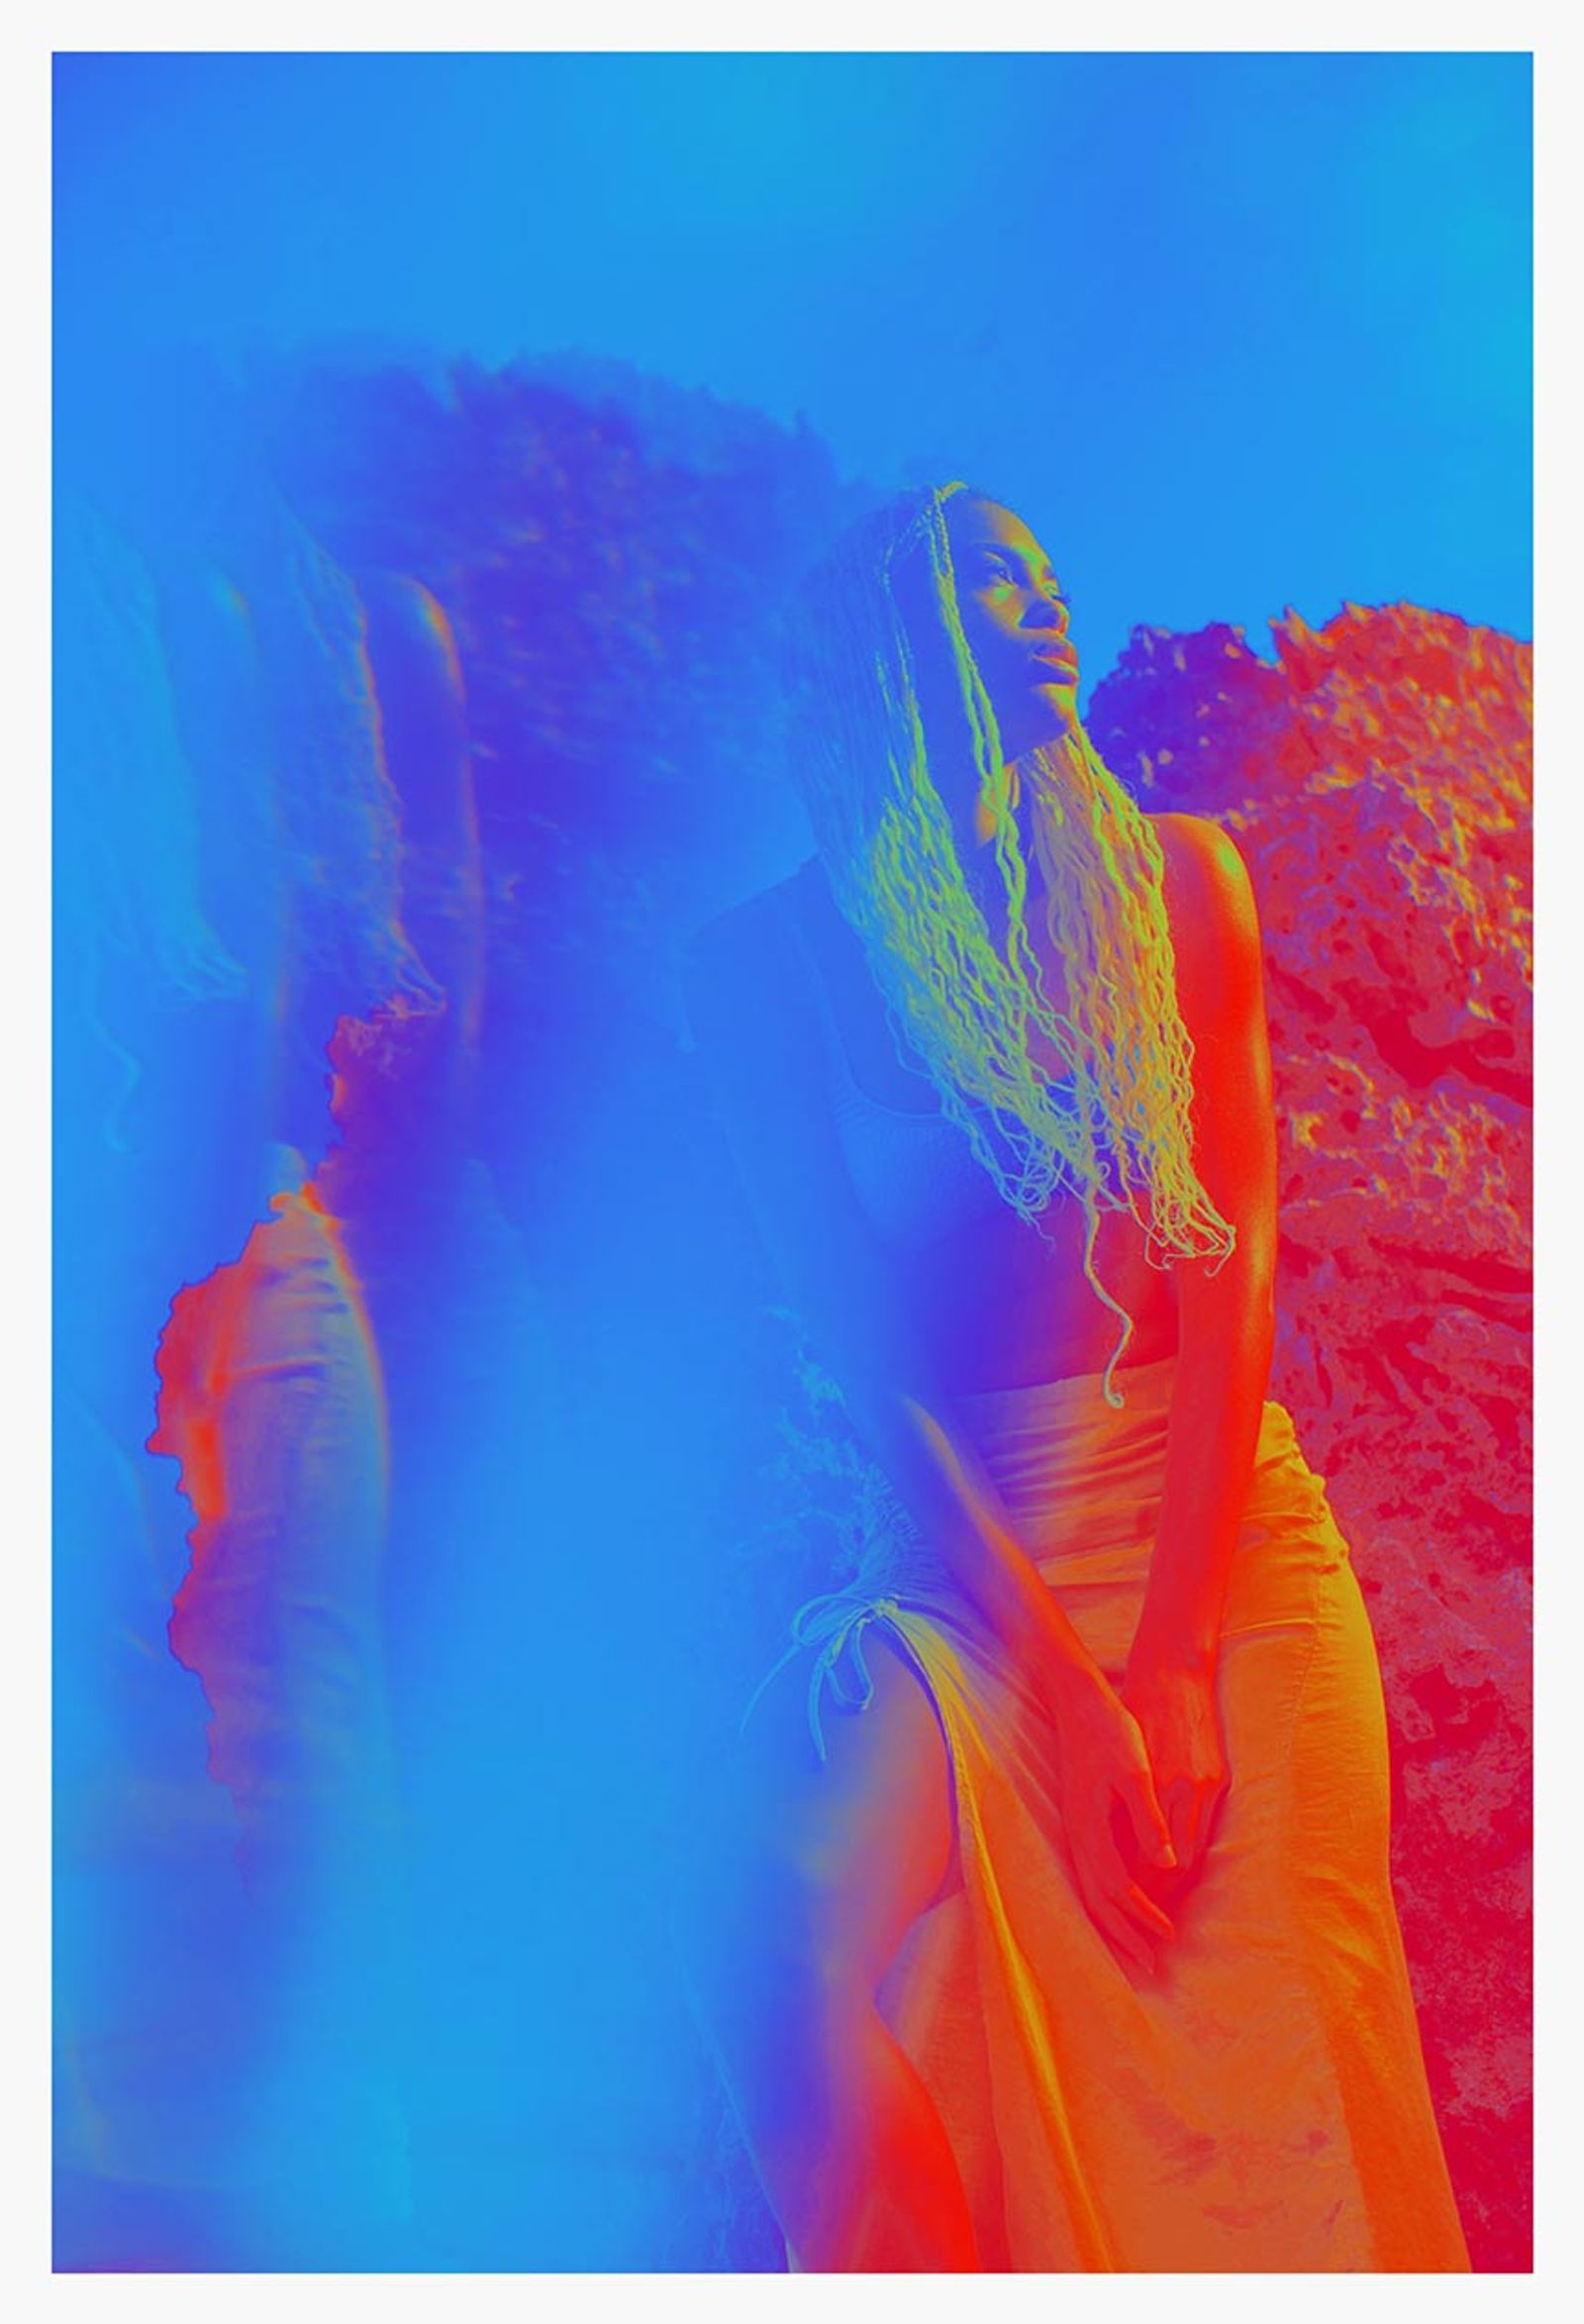 © Meredith Andrews - Image from the Technicolor Dream photography project